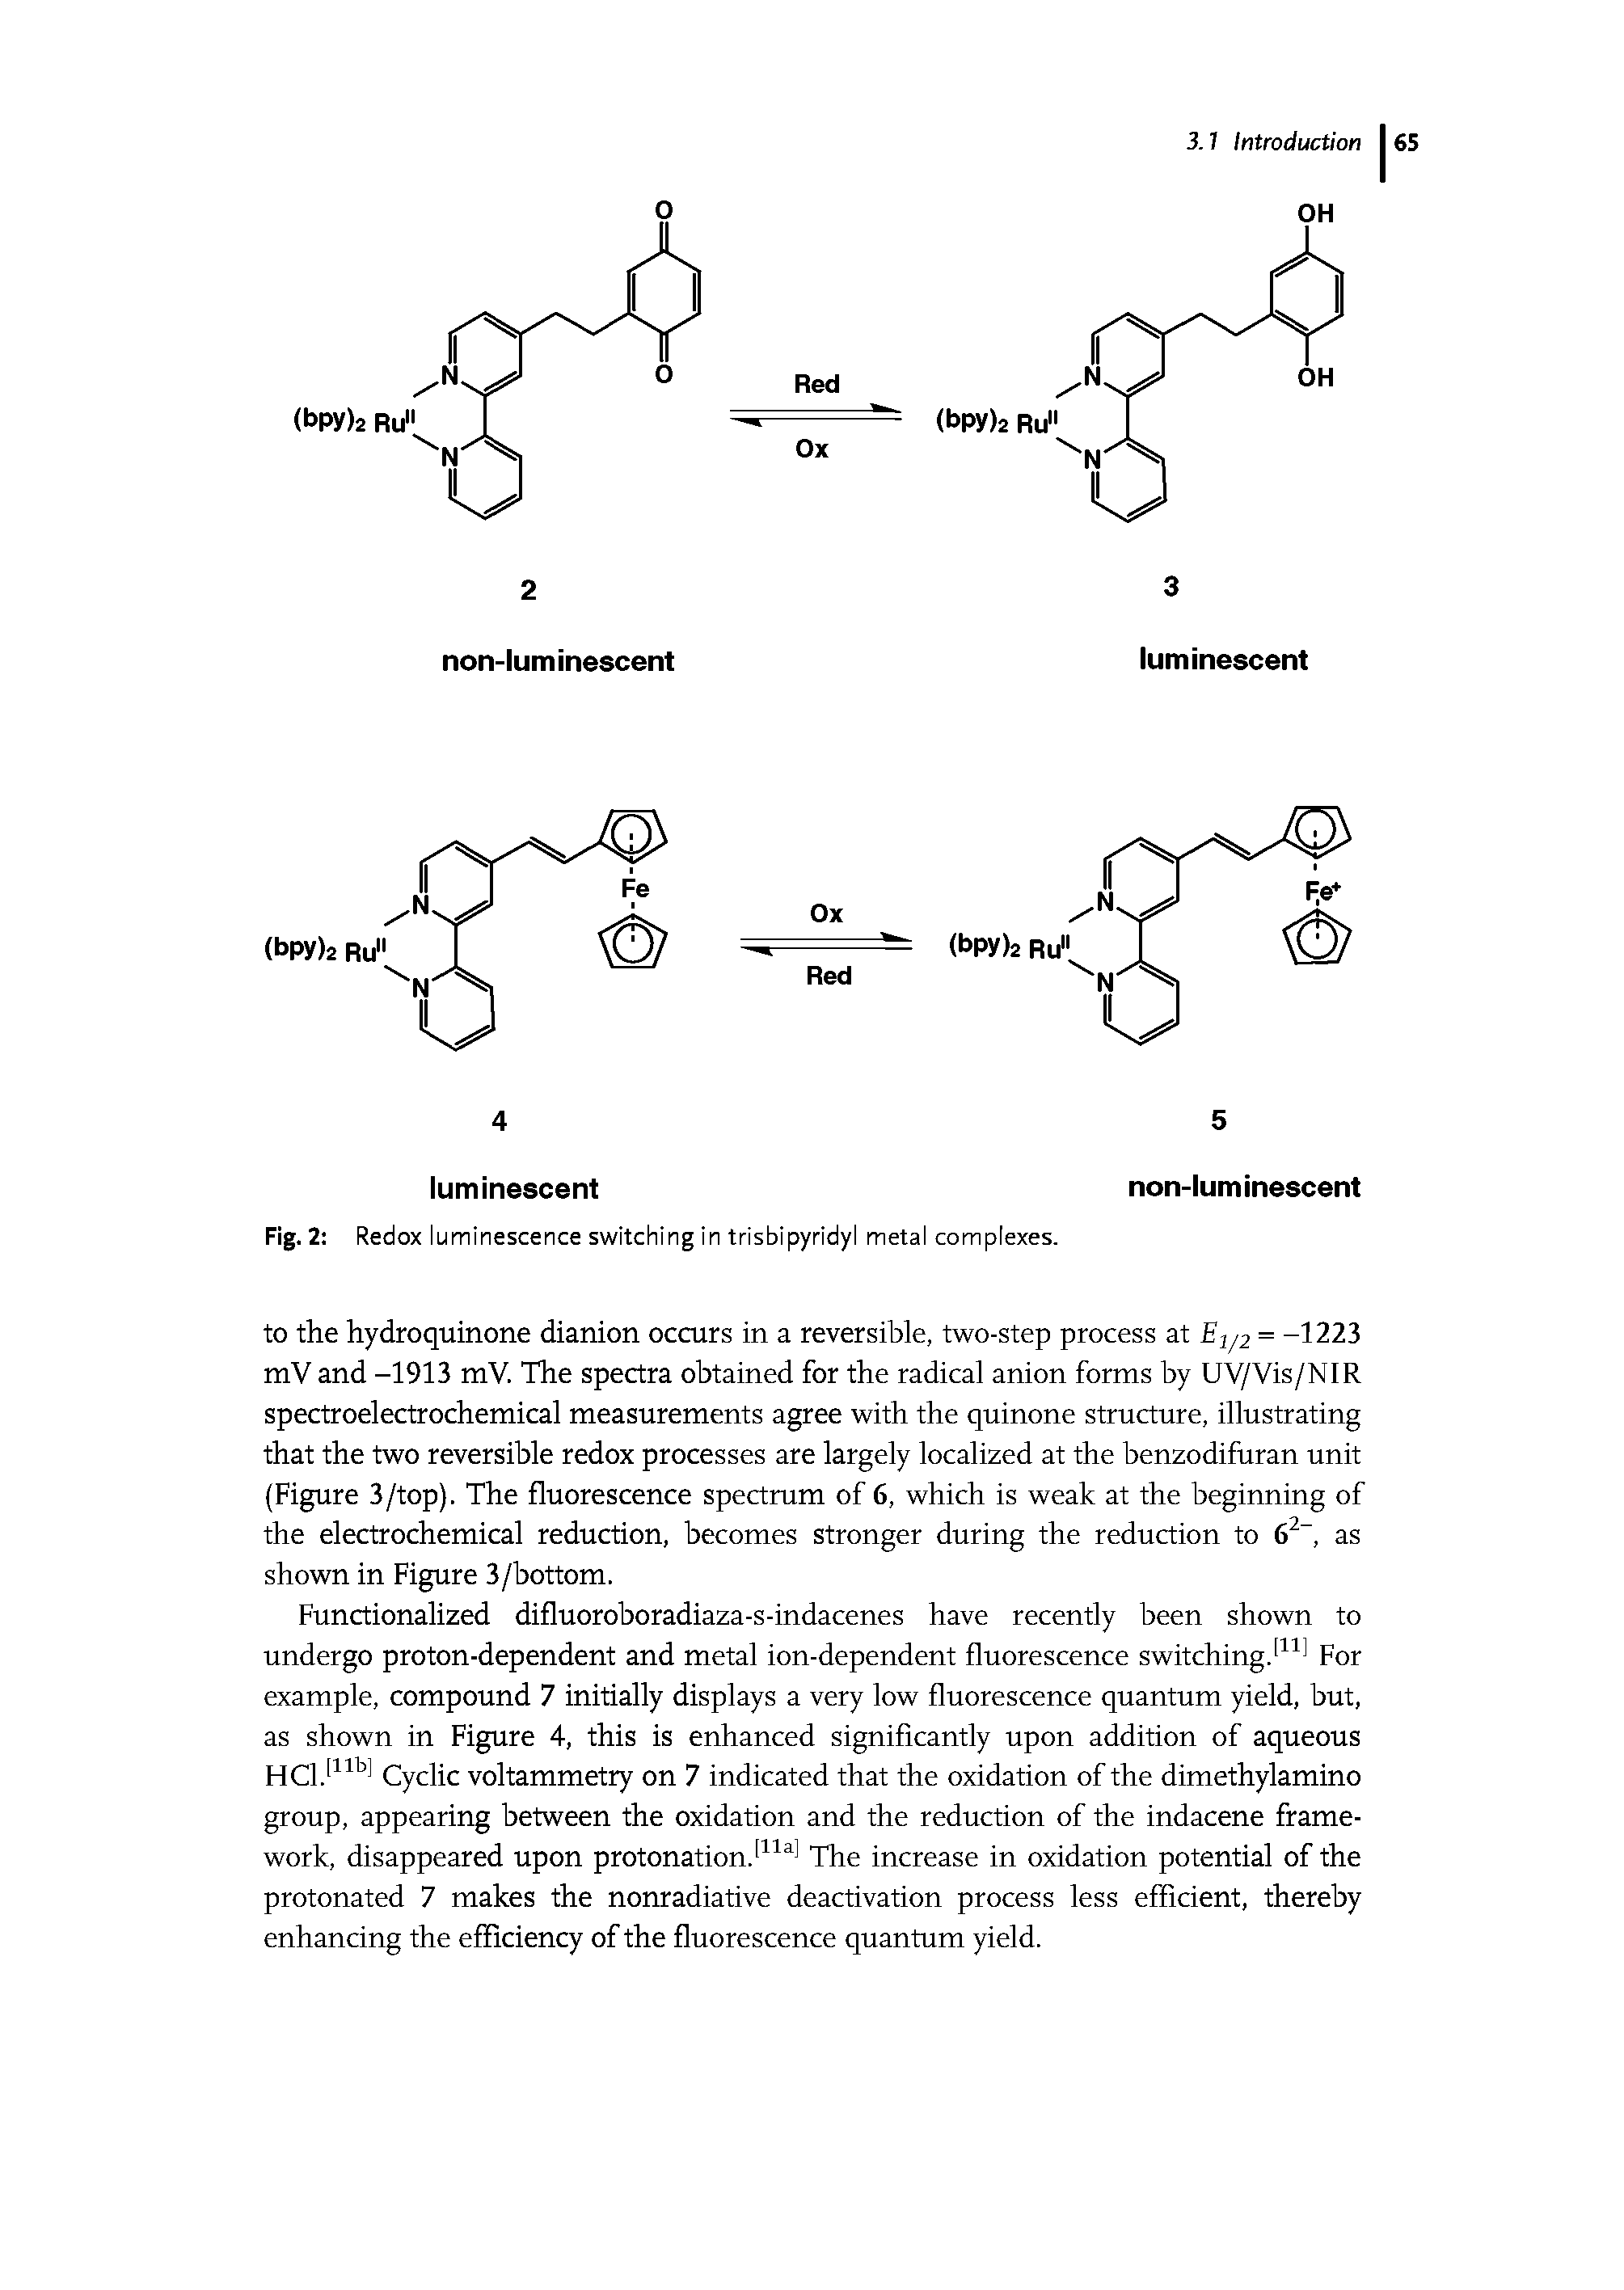 Fig. 2 Redox luminescence switching in trisbipyridyl metal complexes.